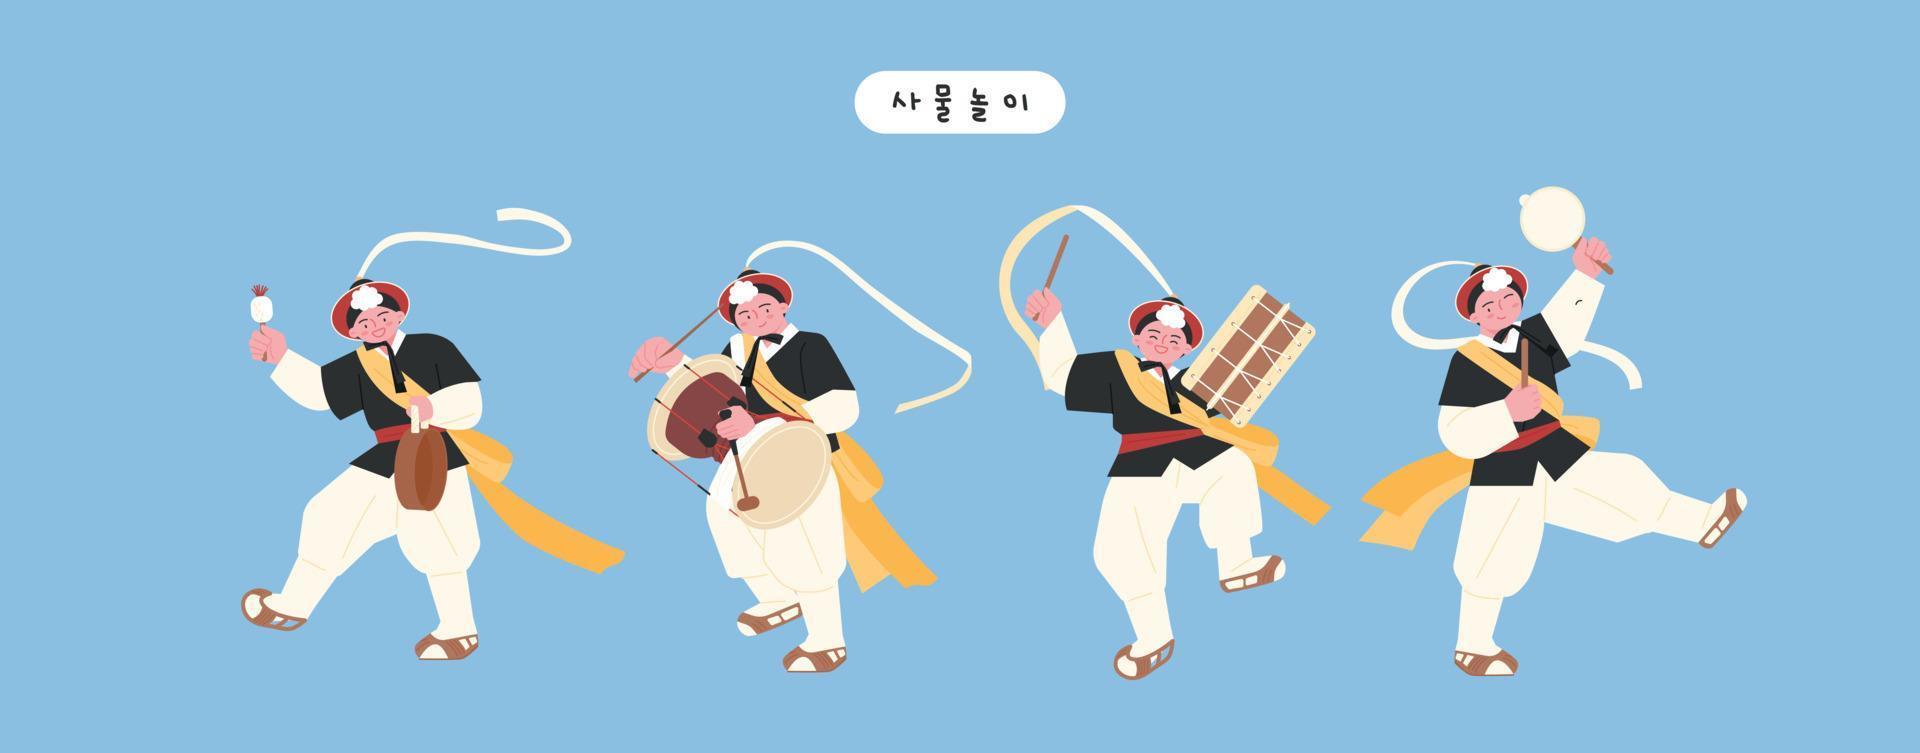 Korean traditional music. Four musicians are performing an exciting performance by spinning ribbonsbove their heads. vector